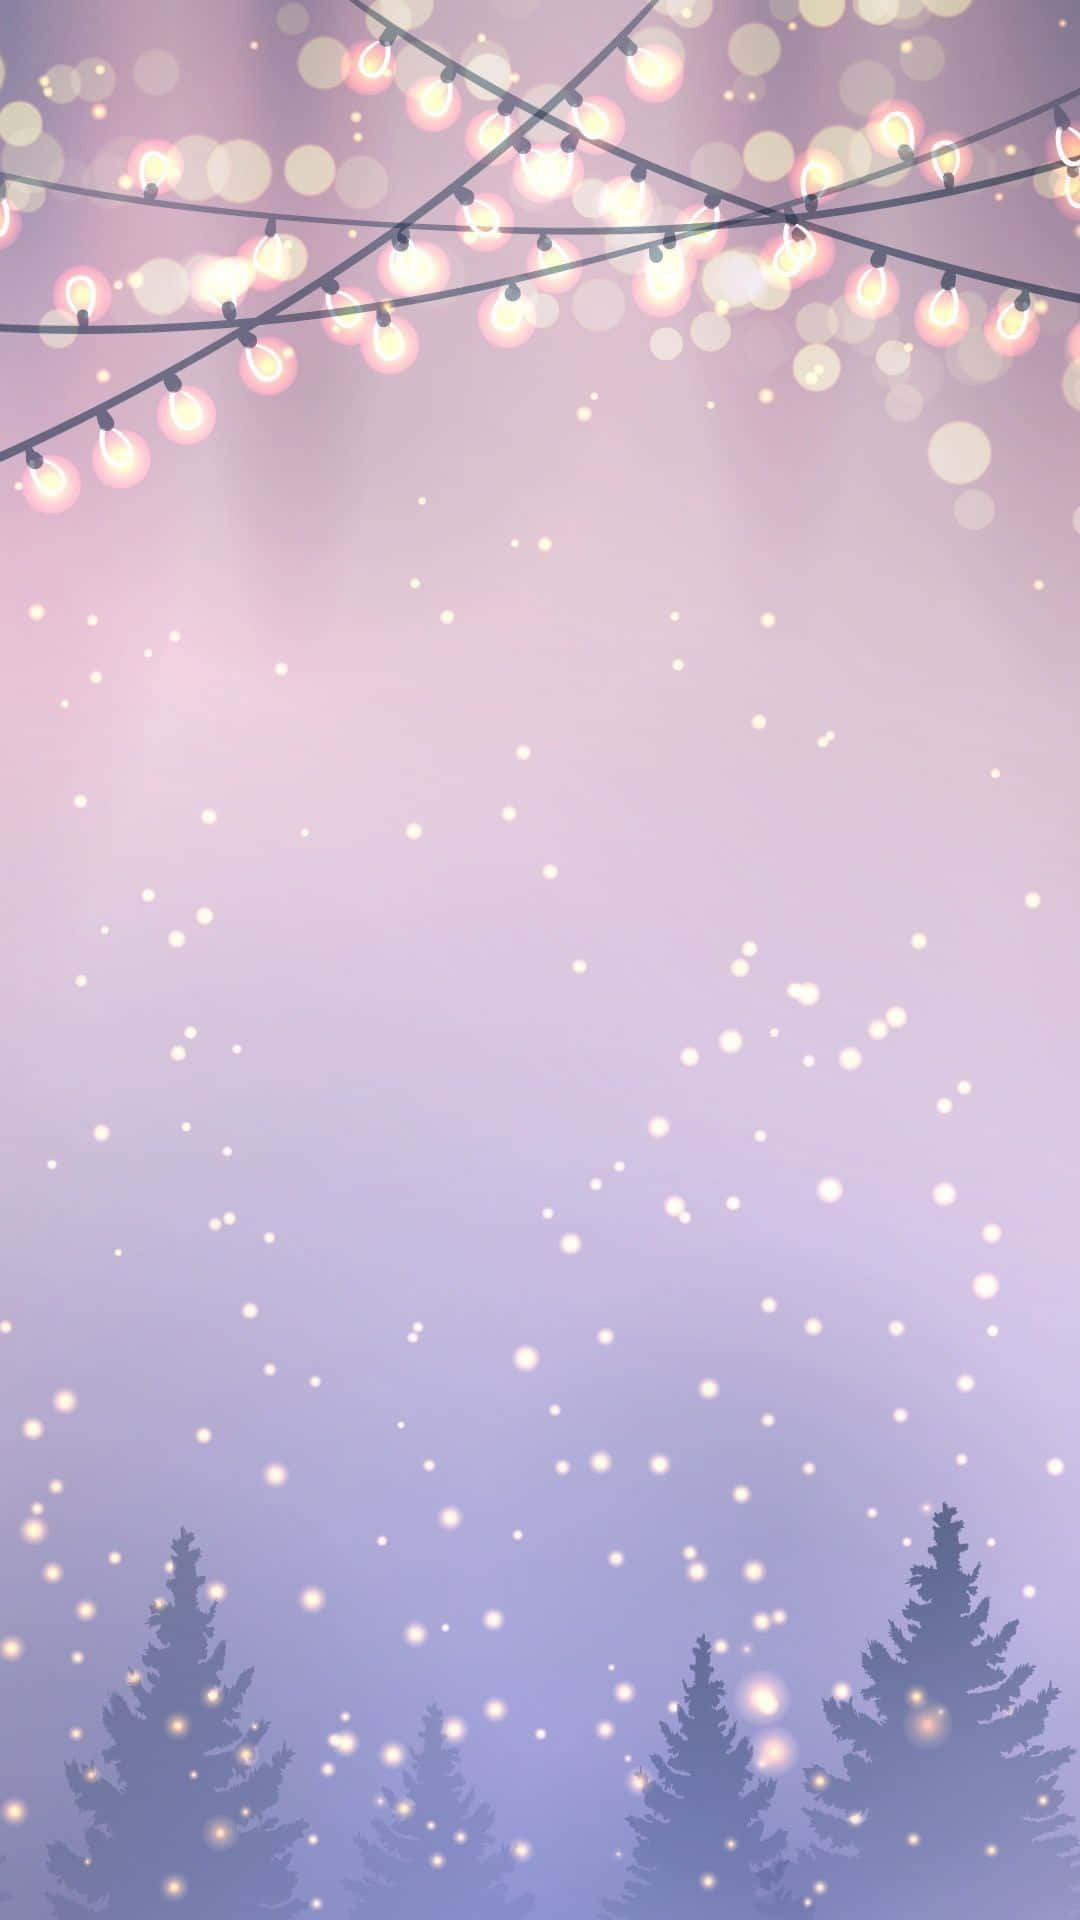 Never miss out on the holiday vibes this season with a gorgeous Christmas phone background.